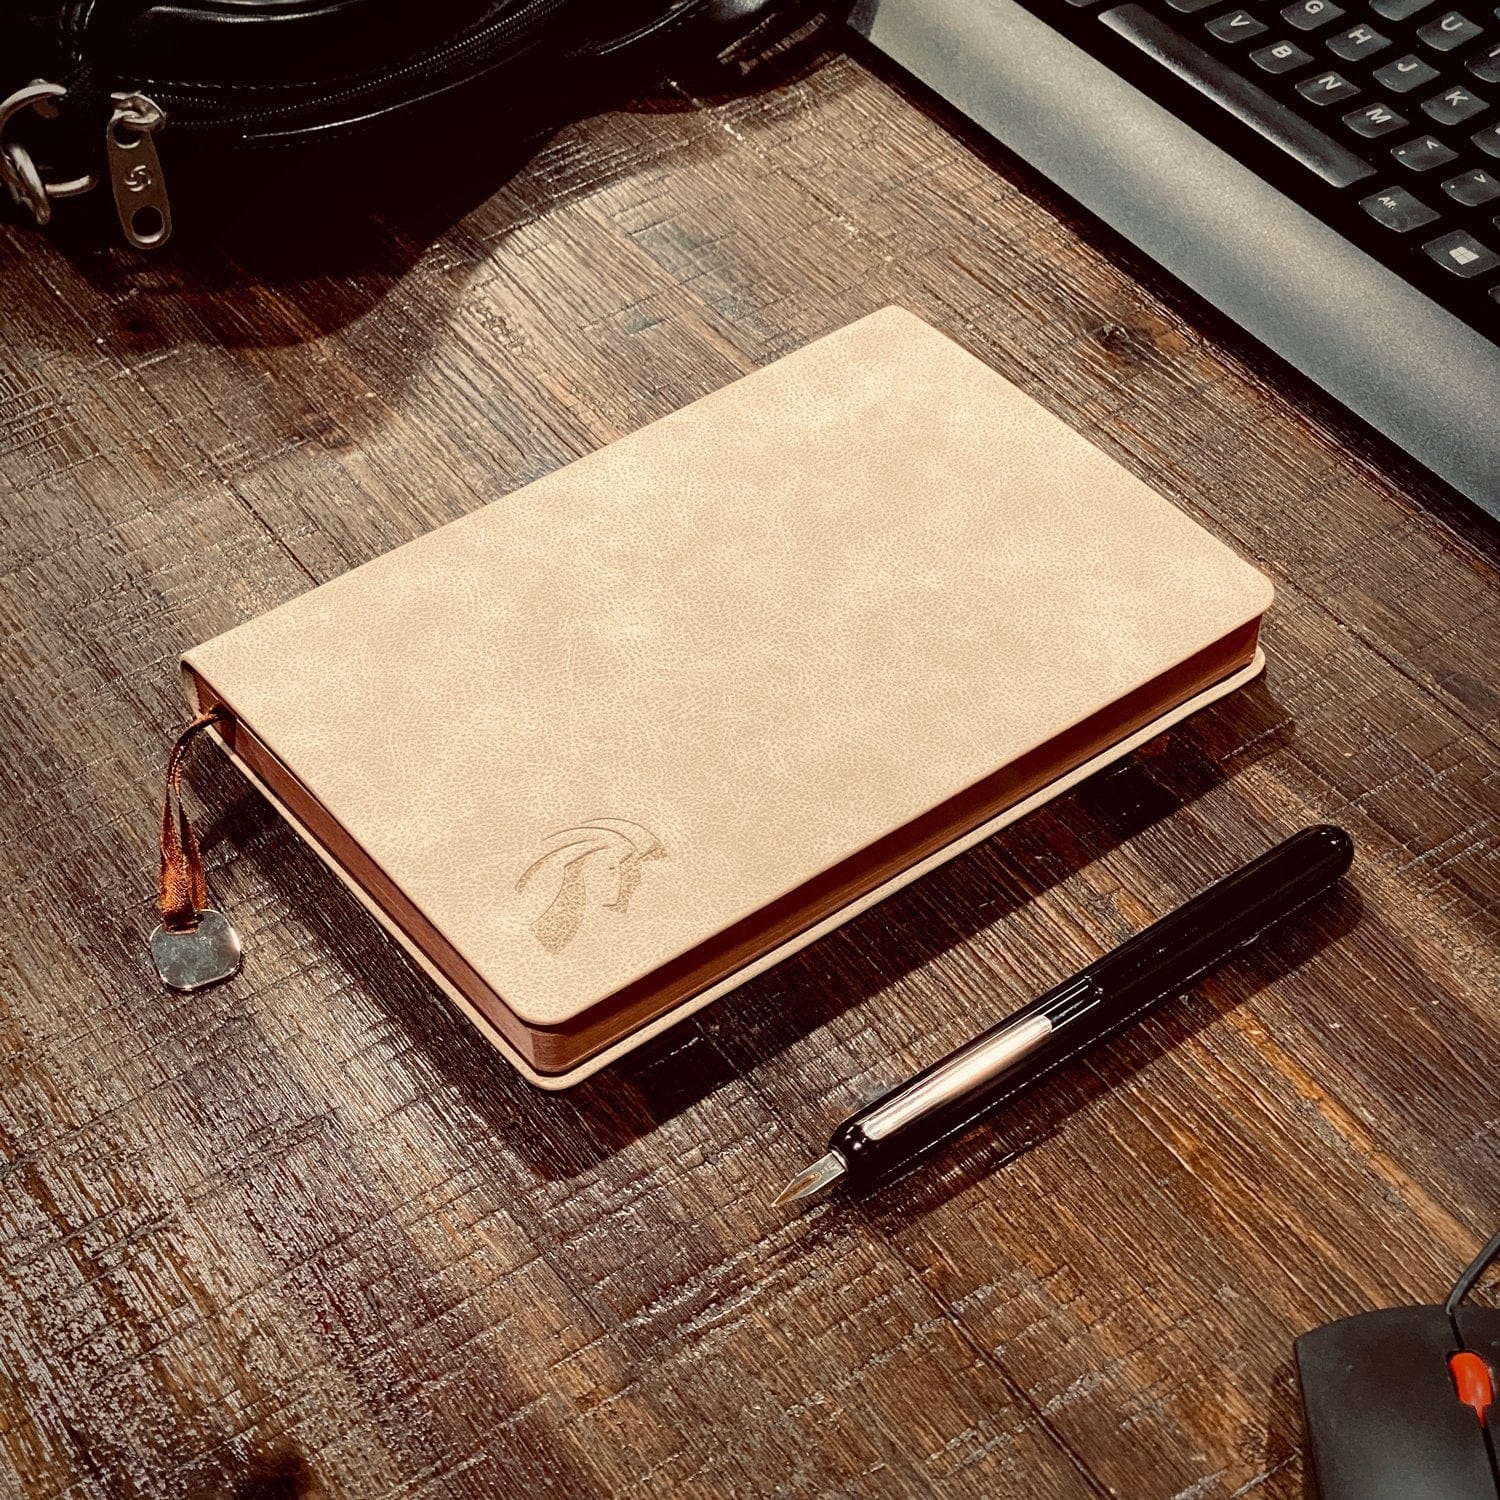 What kind of notebook do you use with a fountain pen? – LeStallion